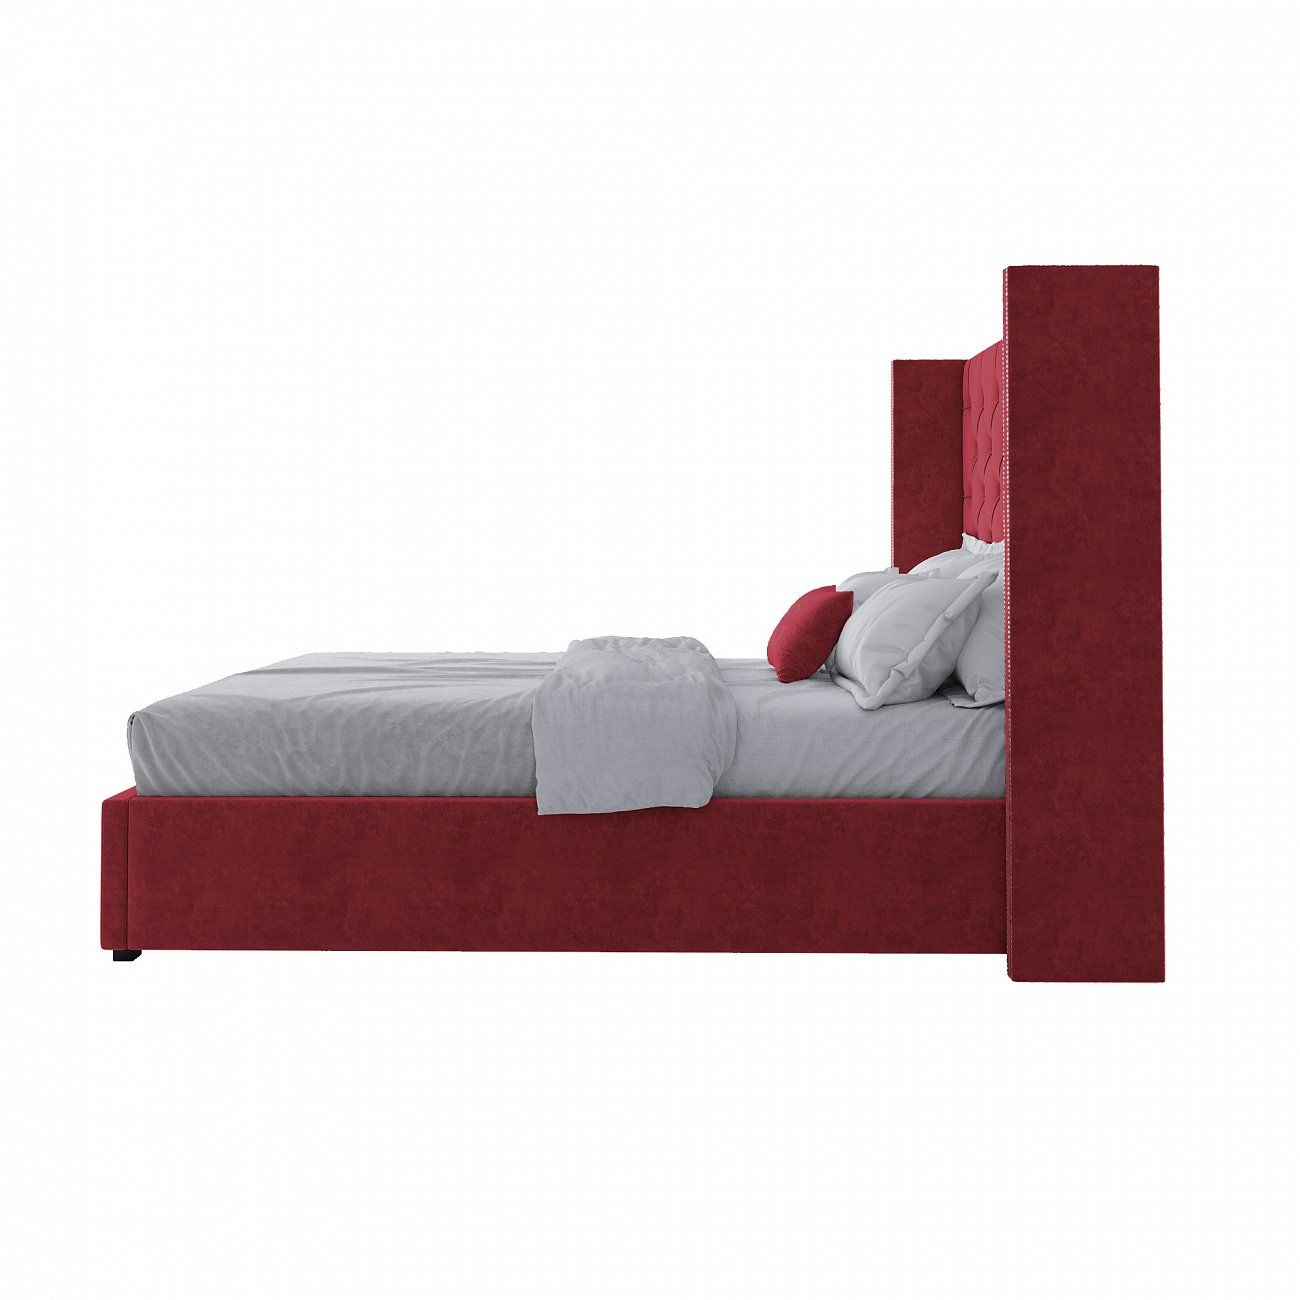 Teenage bed 140x200 cm red with carnations Wing